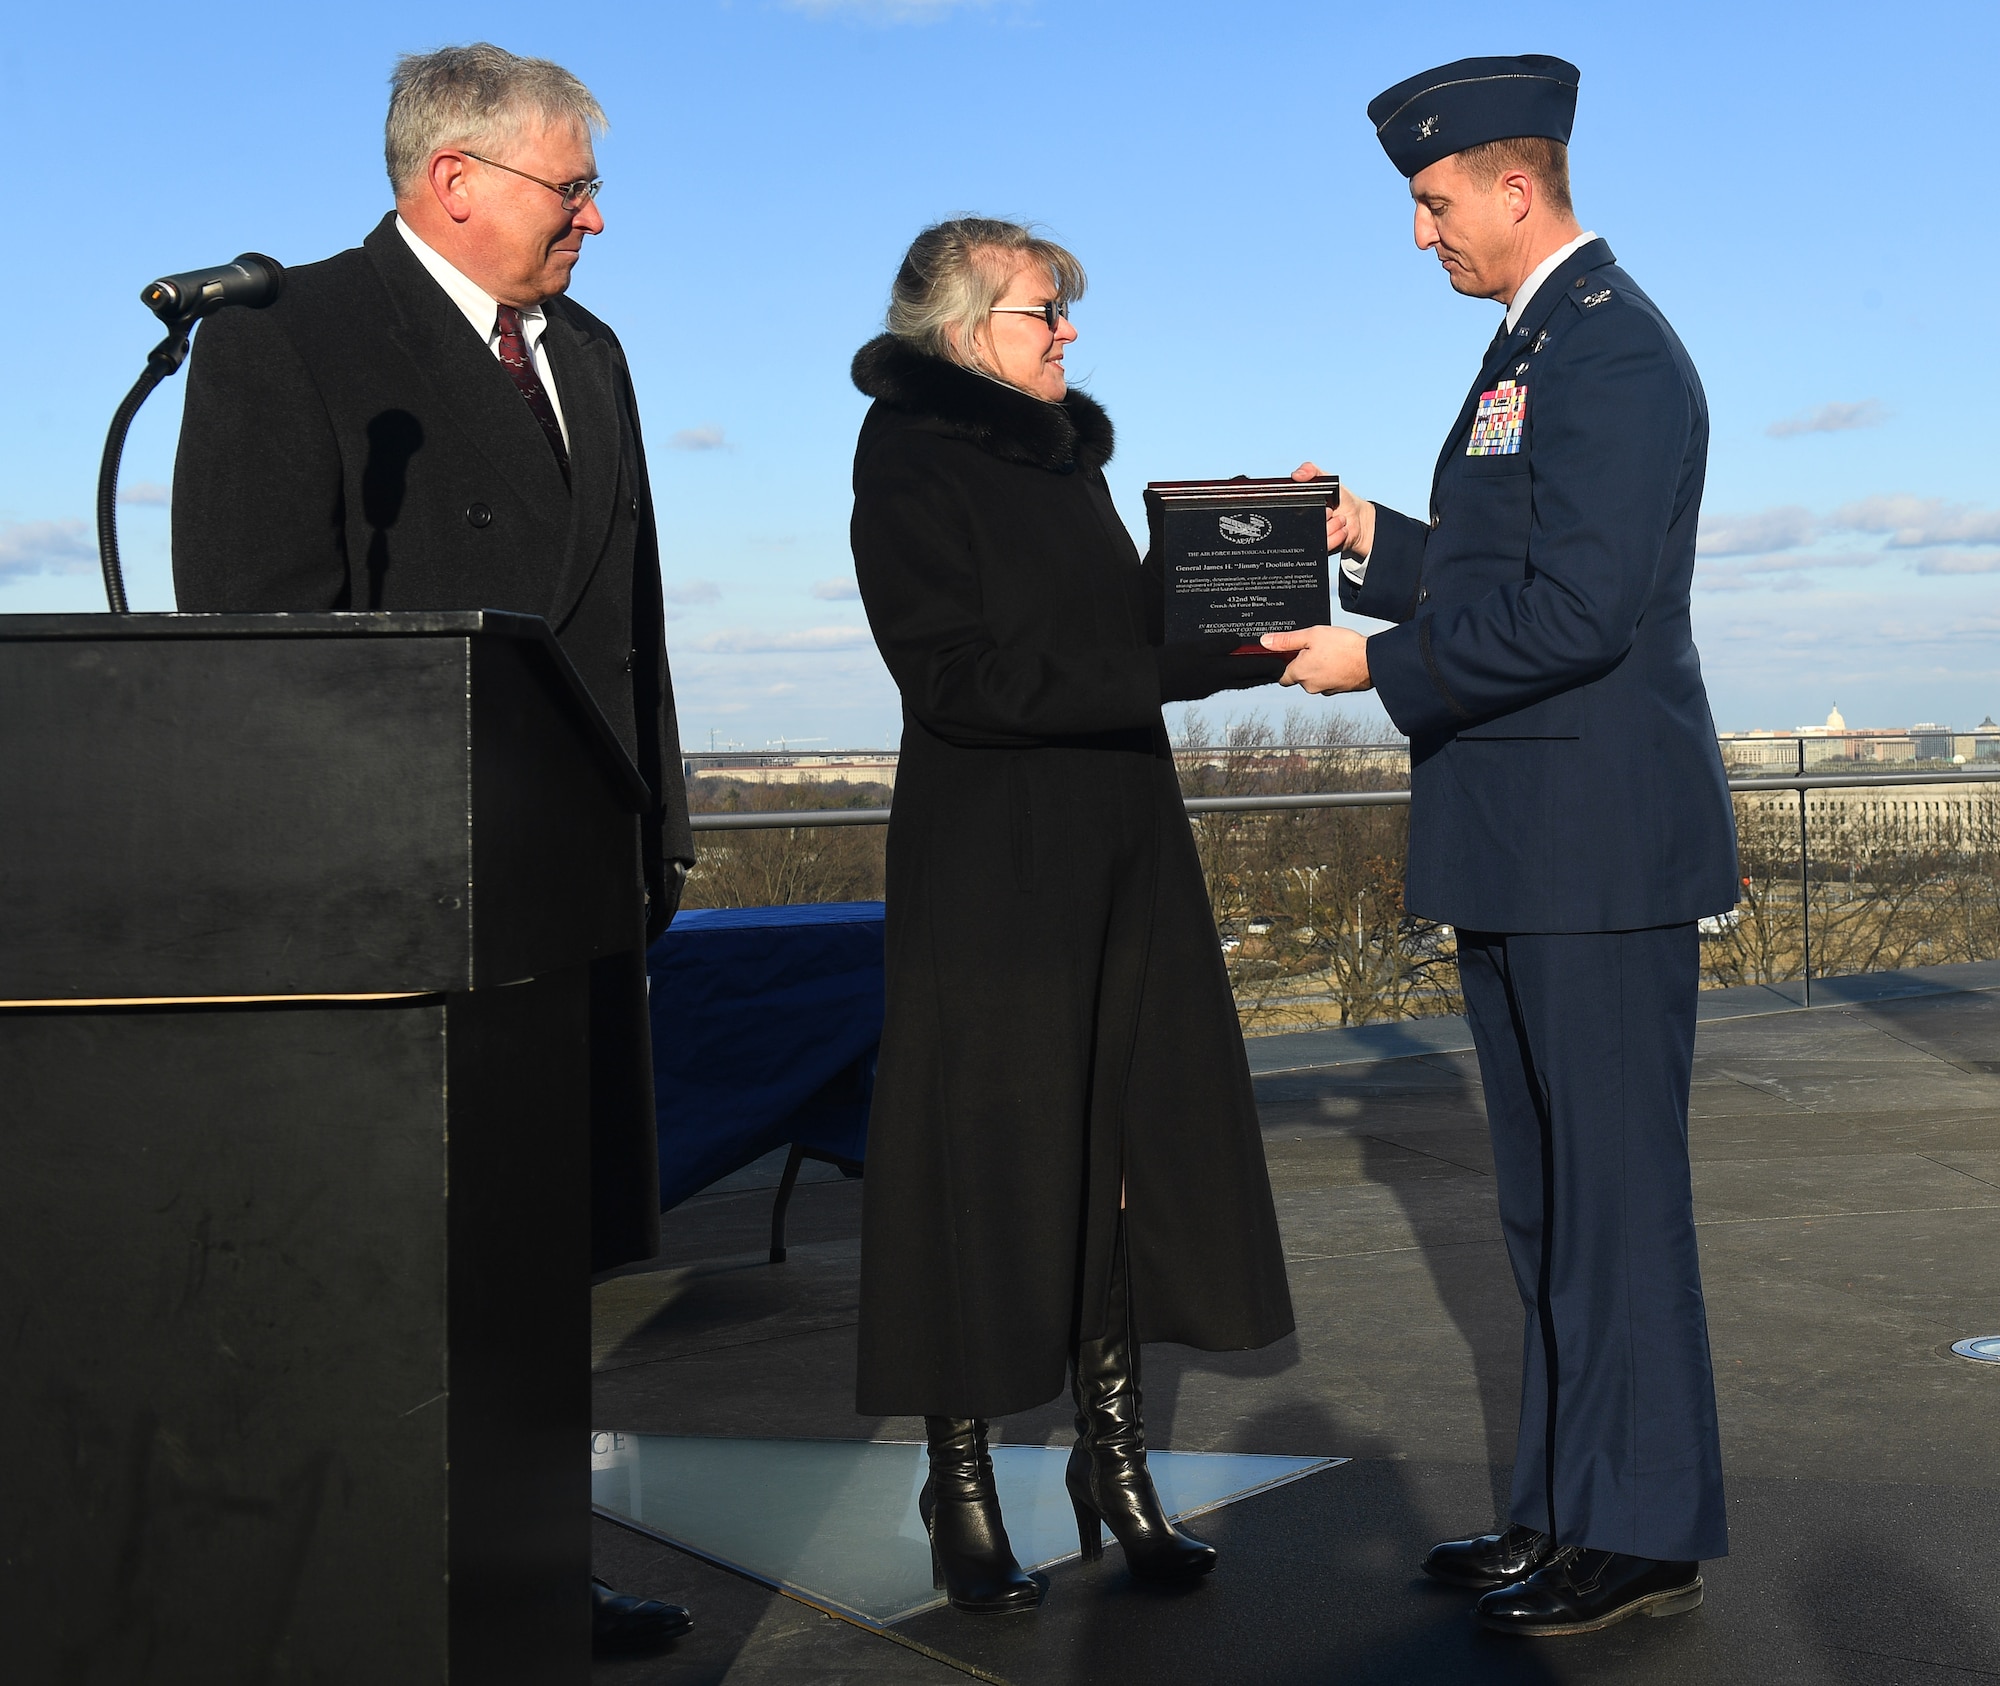 Ms. Jonna Doolittle Hoppes, executive director of the Doolittle Foundation and granddaughter of Gen. James “Jimmy” Doolittle, and retired Lt. Gen. Christopher Miller, president of the Air Force Historical Foundation, present the General James H. “Jimmy” Doolittle award to Col. Julian Cheater on behalf of the 432nd Wing/432nd Air Expeditionary Wing Jan. 18, 2018, at Creech Air Force Base, Nev. The General James H. “Jimmy” Doolittle award is presented to units who display gallantry, determination, espirit de corps and superior management of joint operations in accomplishing its mission under difficult and hazardous conditions in multiple conflicts. (U.S. Air Force photo/Senior Airman James Thompson)